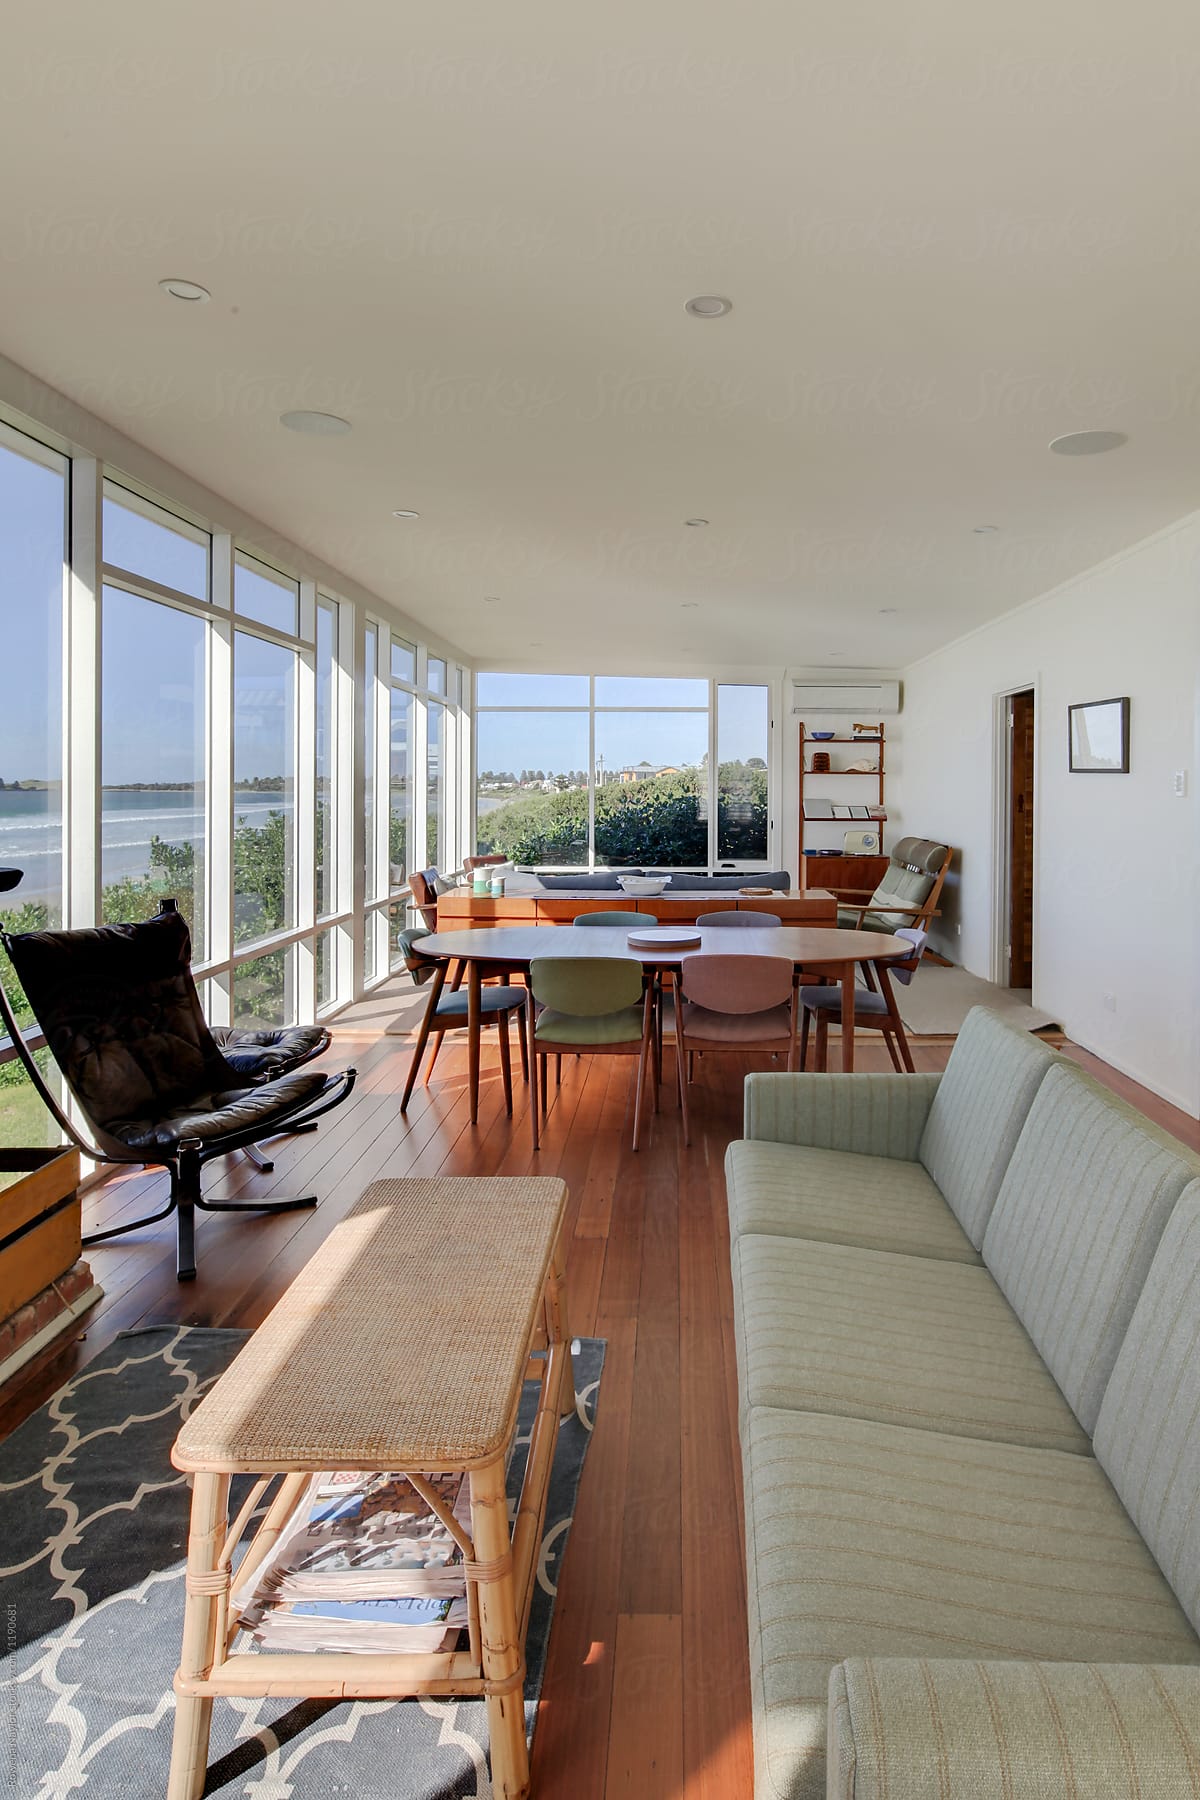 Styled beach house with mid-century furniture